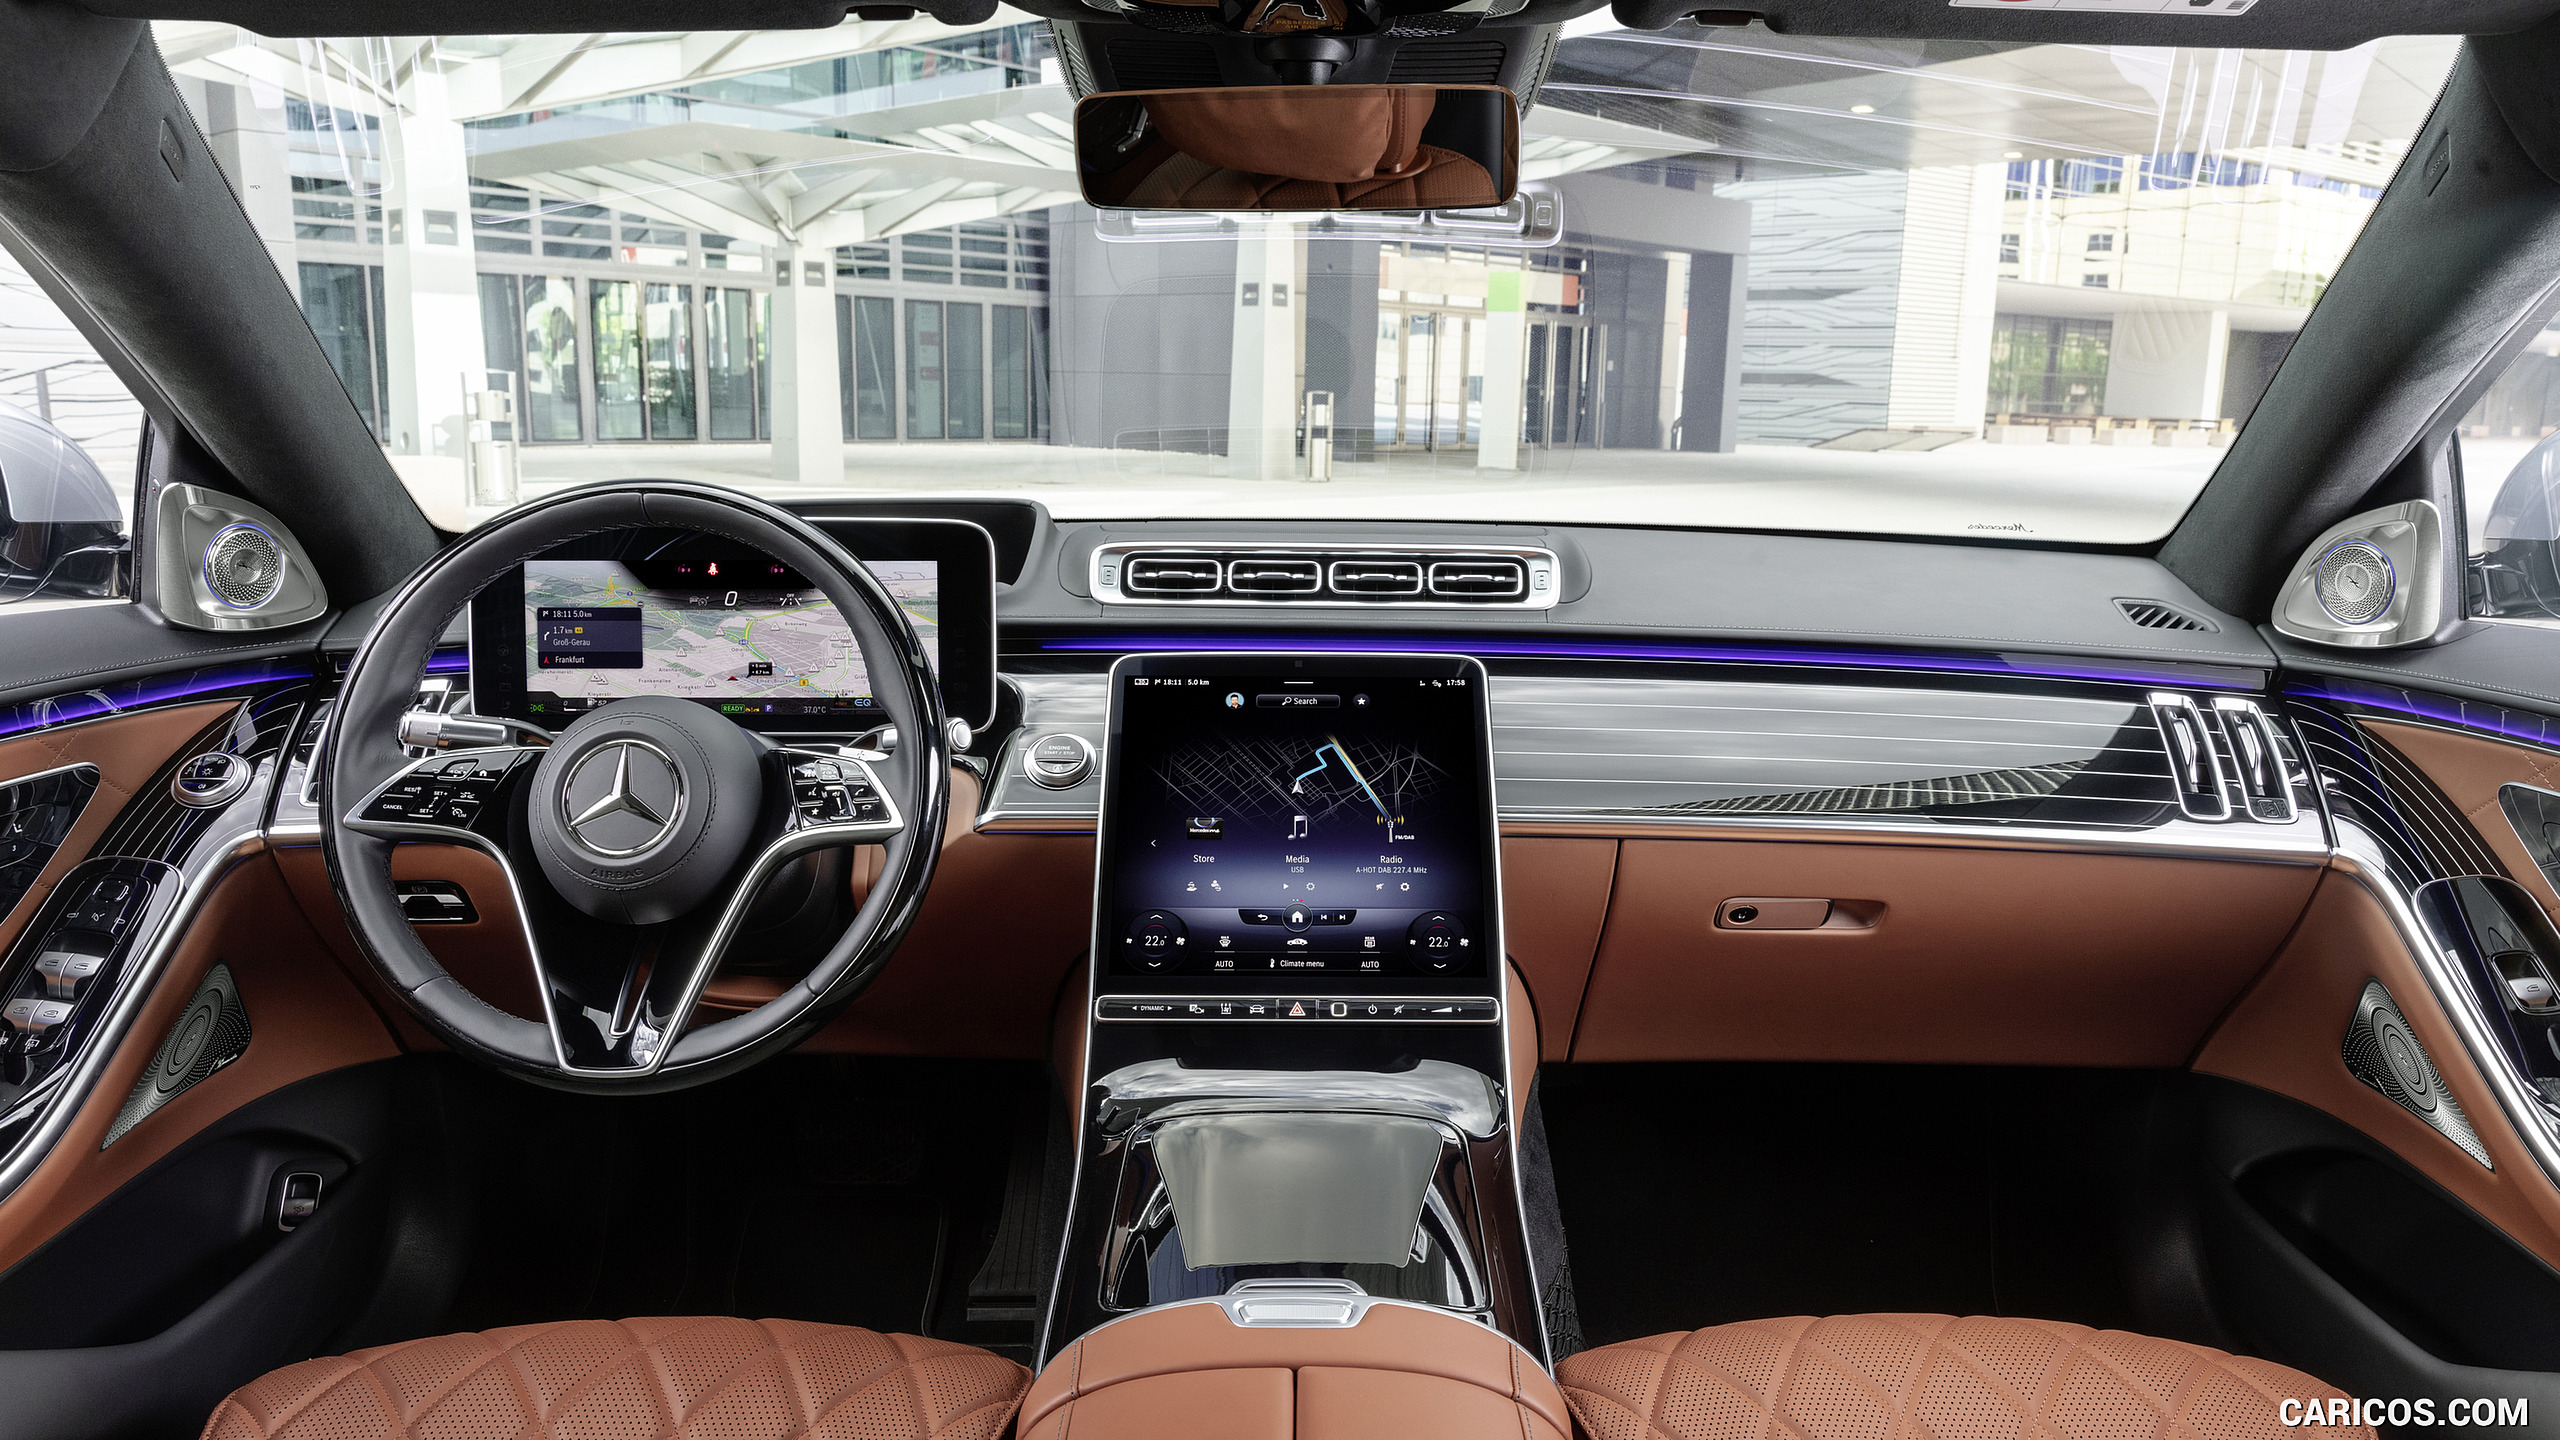 2021 Mercedes-Benz S-Class (Color: Leather Siena Brown) - Interior, Cockpit, #113 of 316